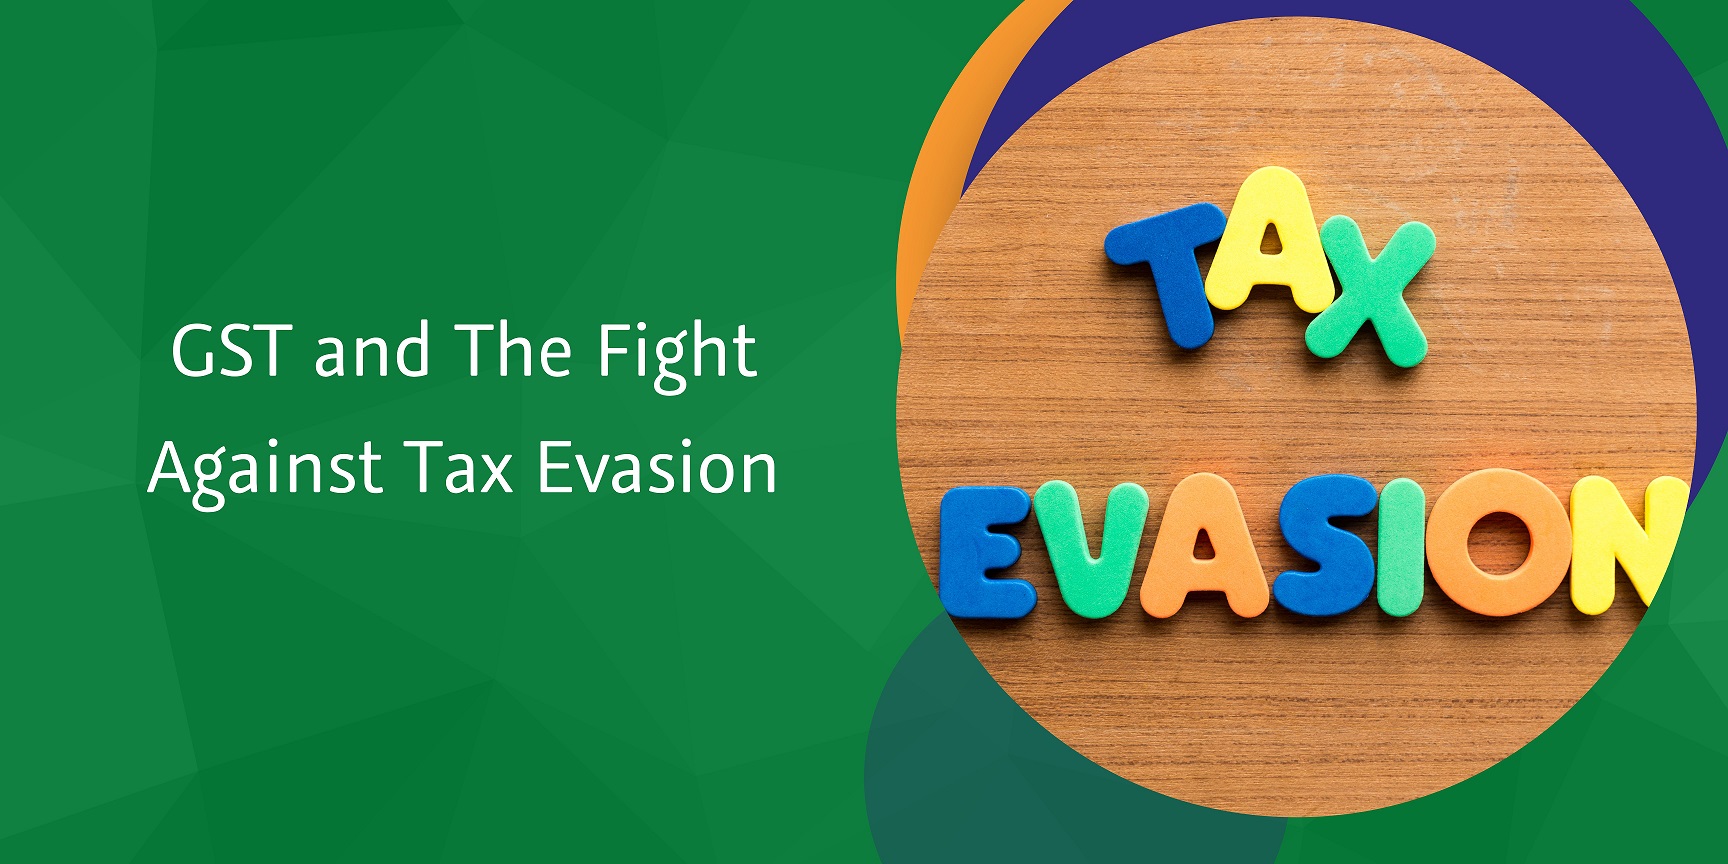 CaptainBiz: GST and The Fight Against Tax Evasion